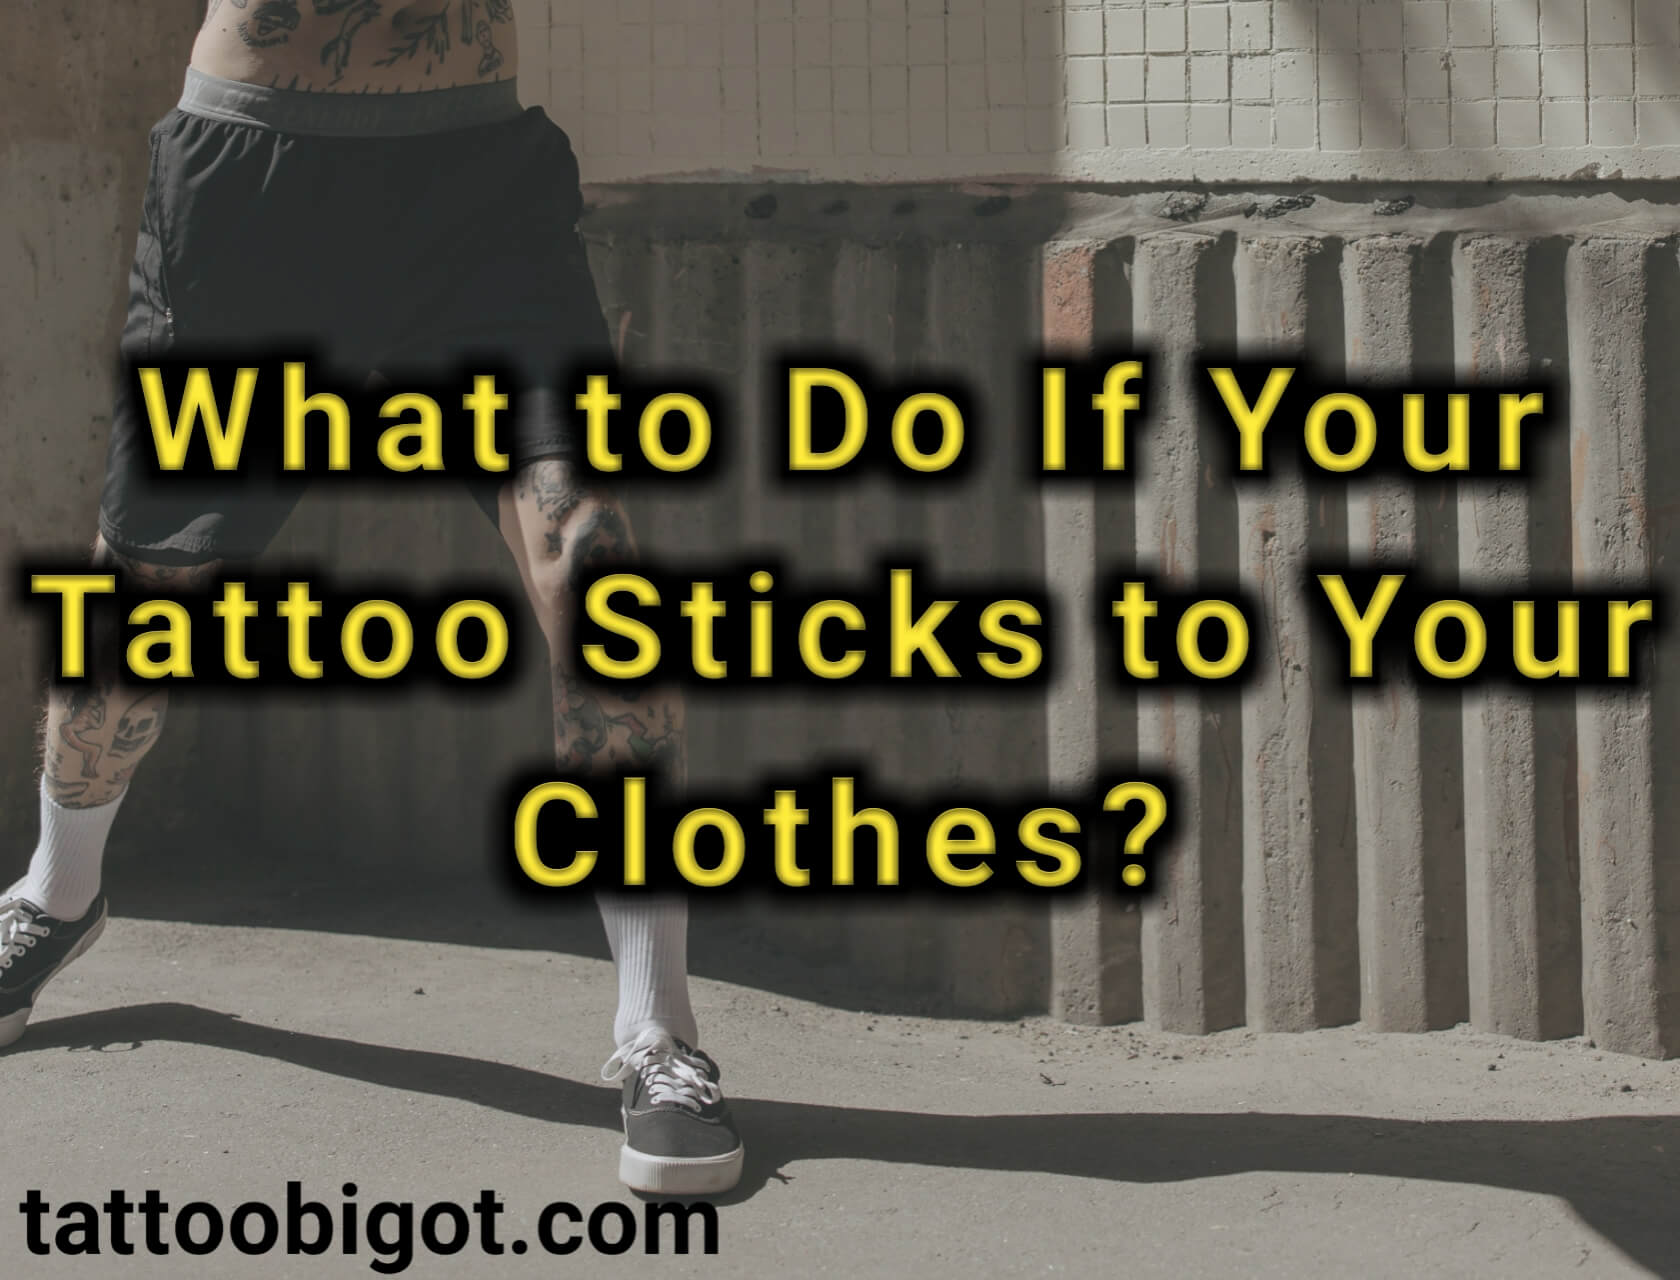 What to Do If Your Tattoo Sticks to Your Clothes